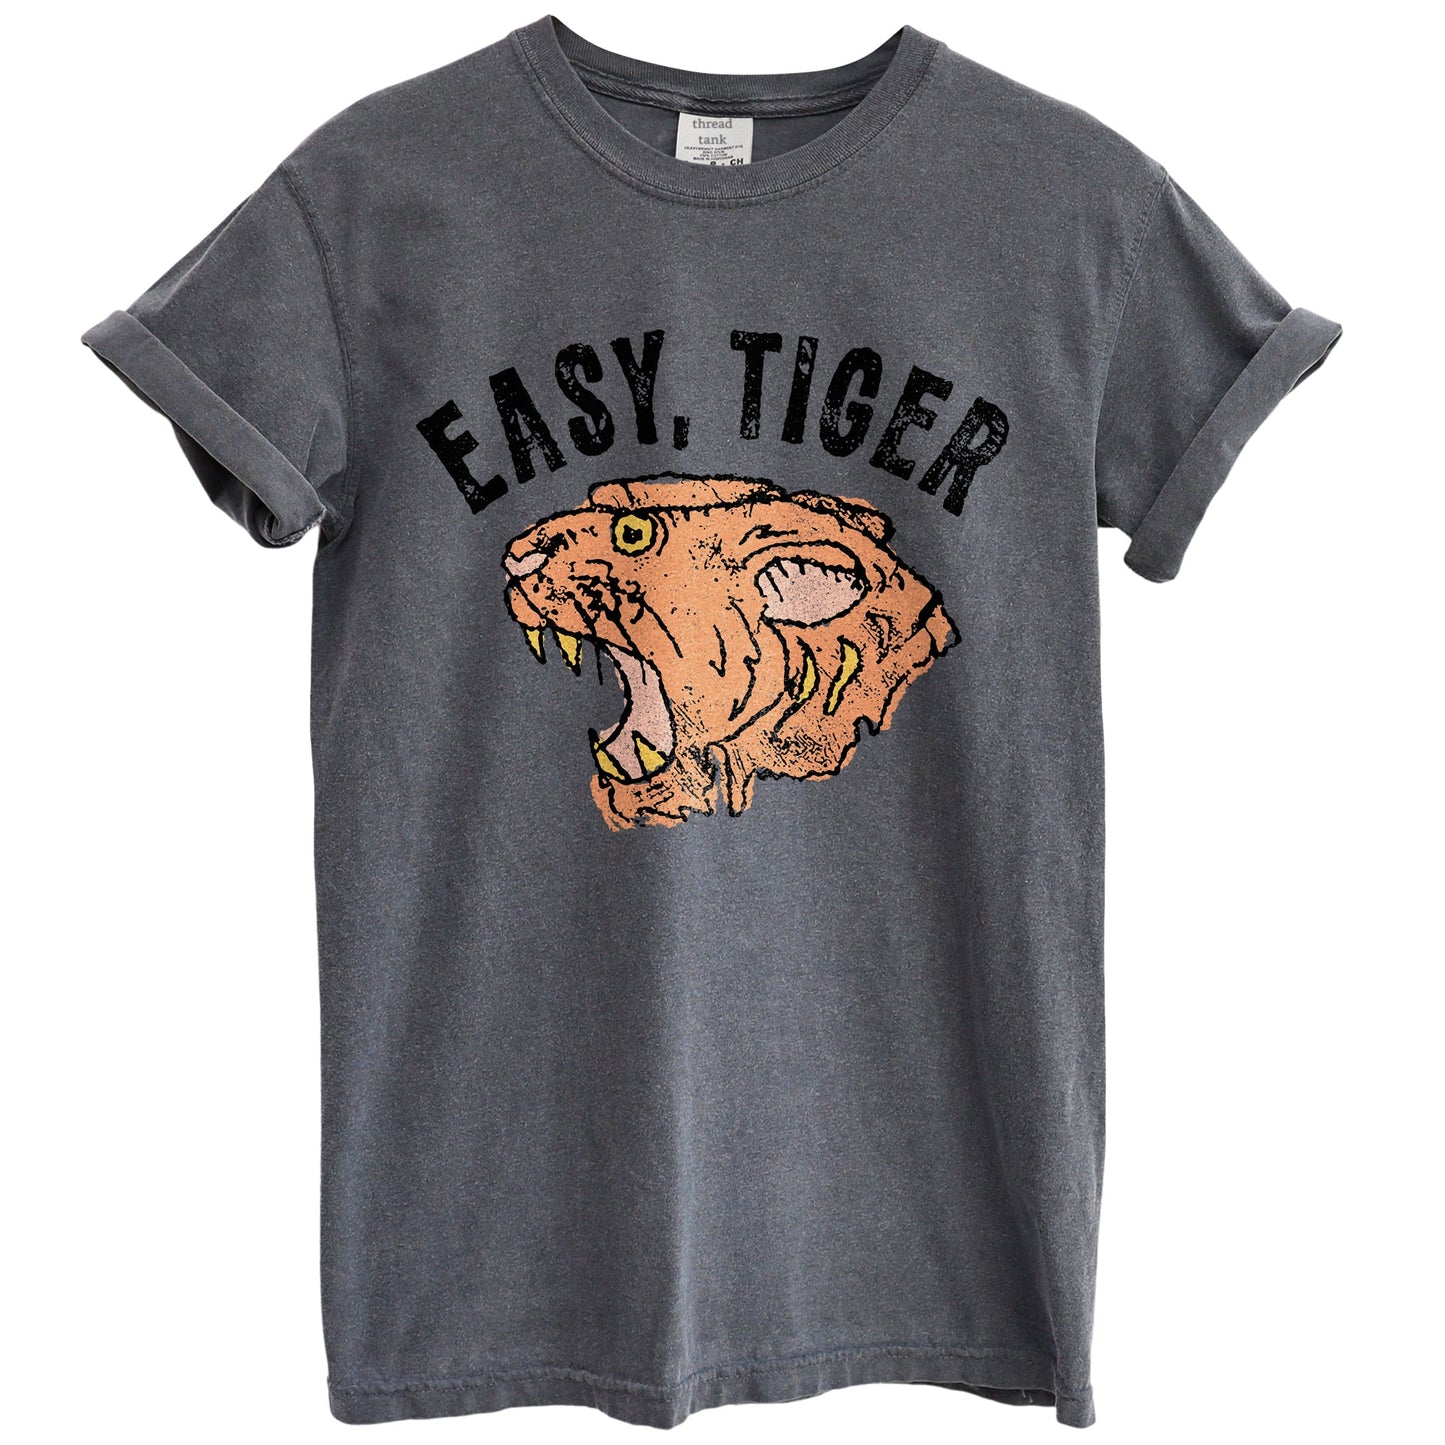 Easy Tiger Fierce Garment-Dyed Tee - Stories You Can Wear